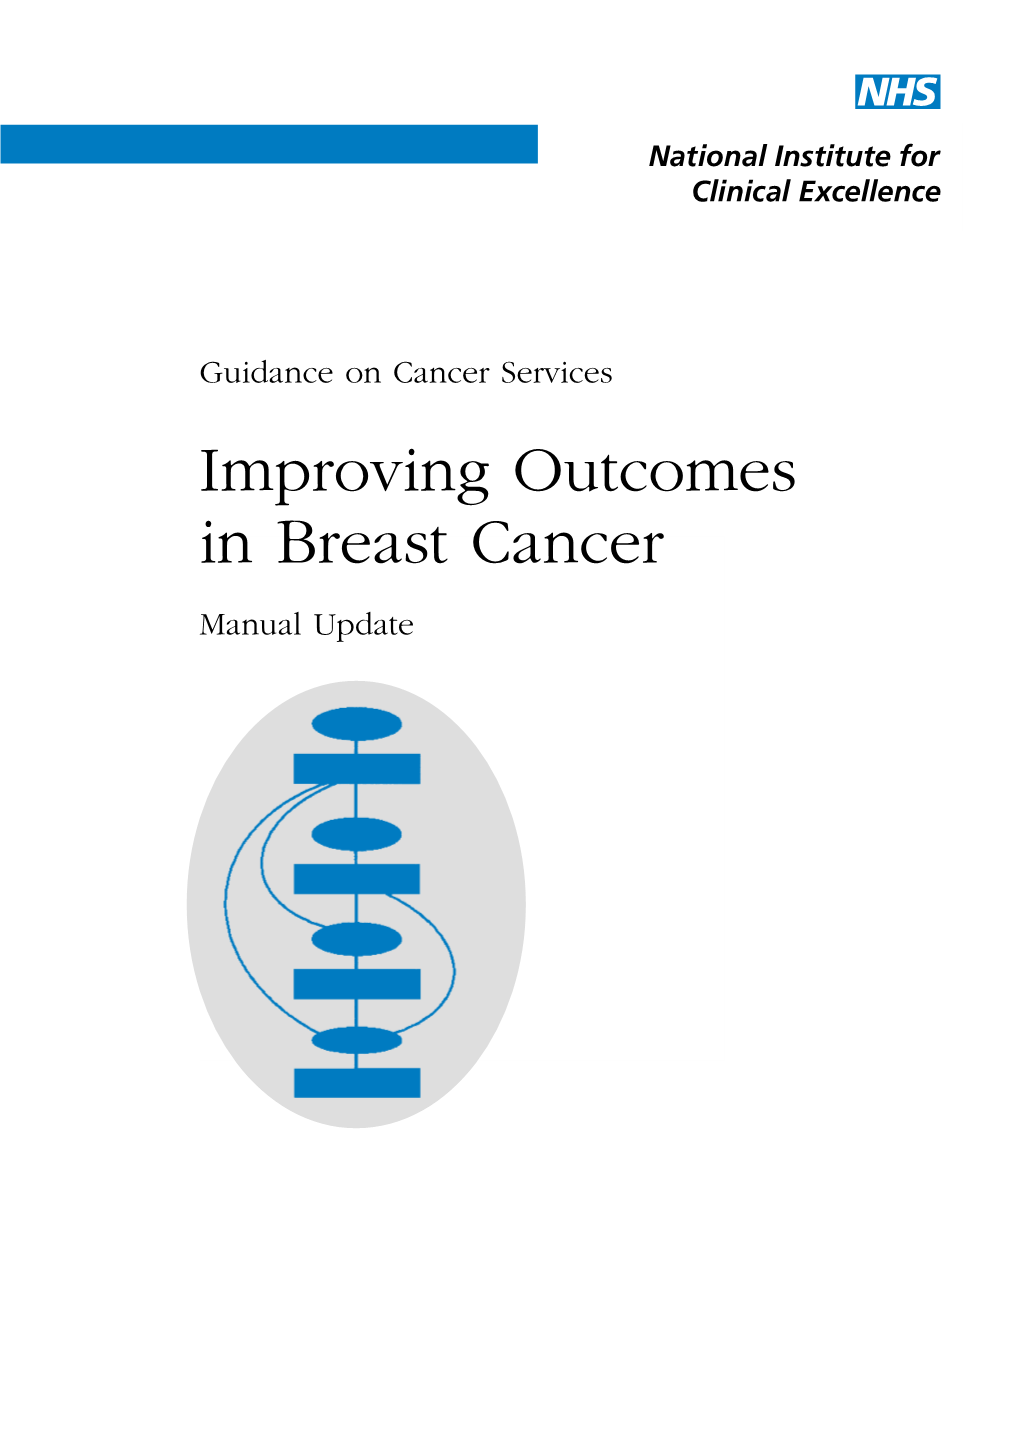 Improving Outcomes in Breast Cancer